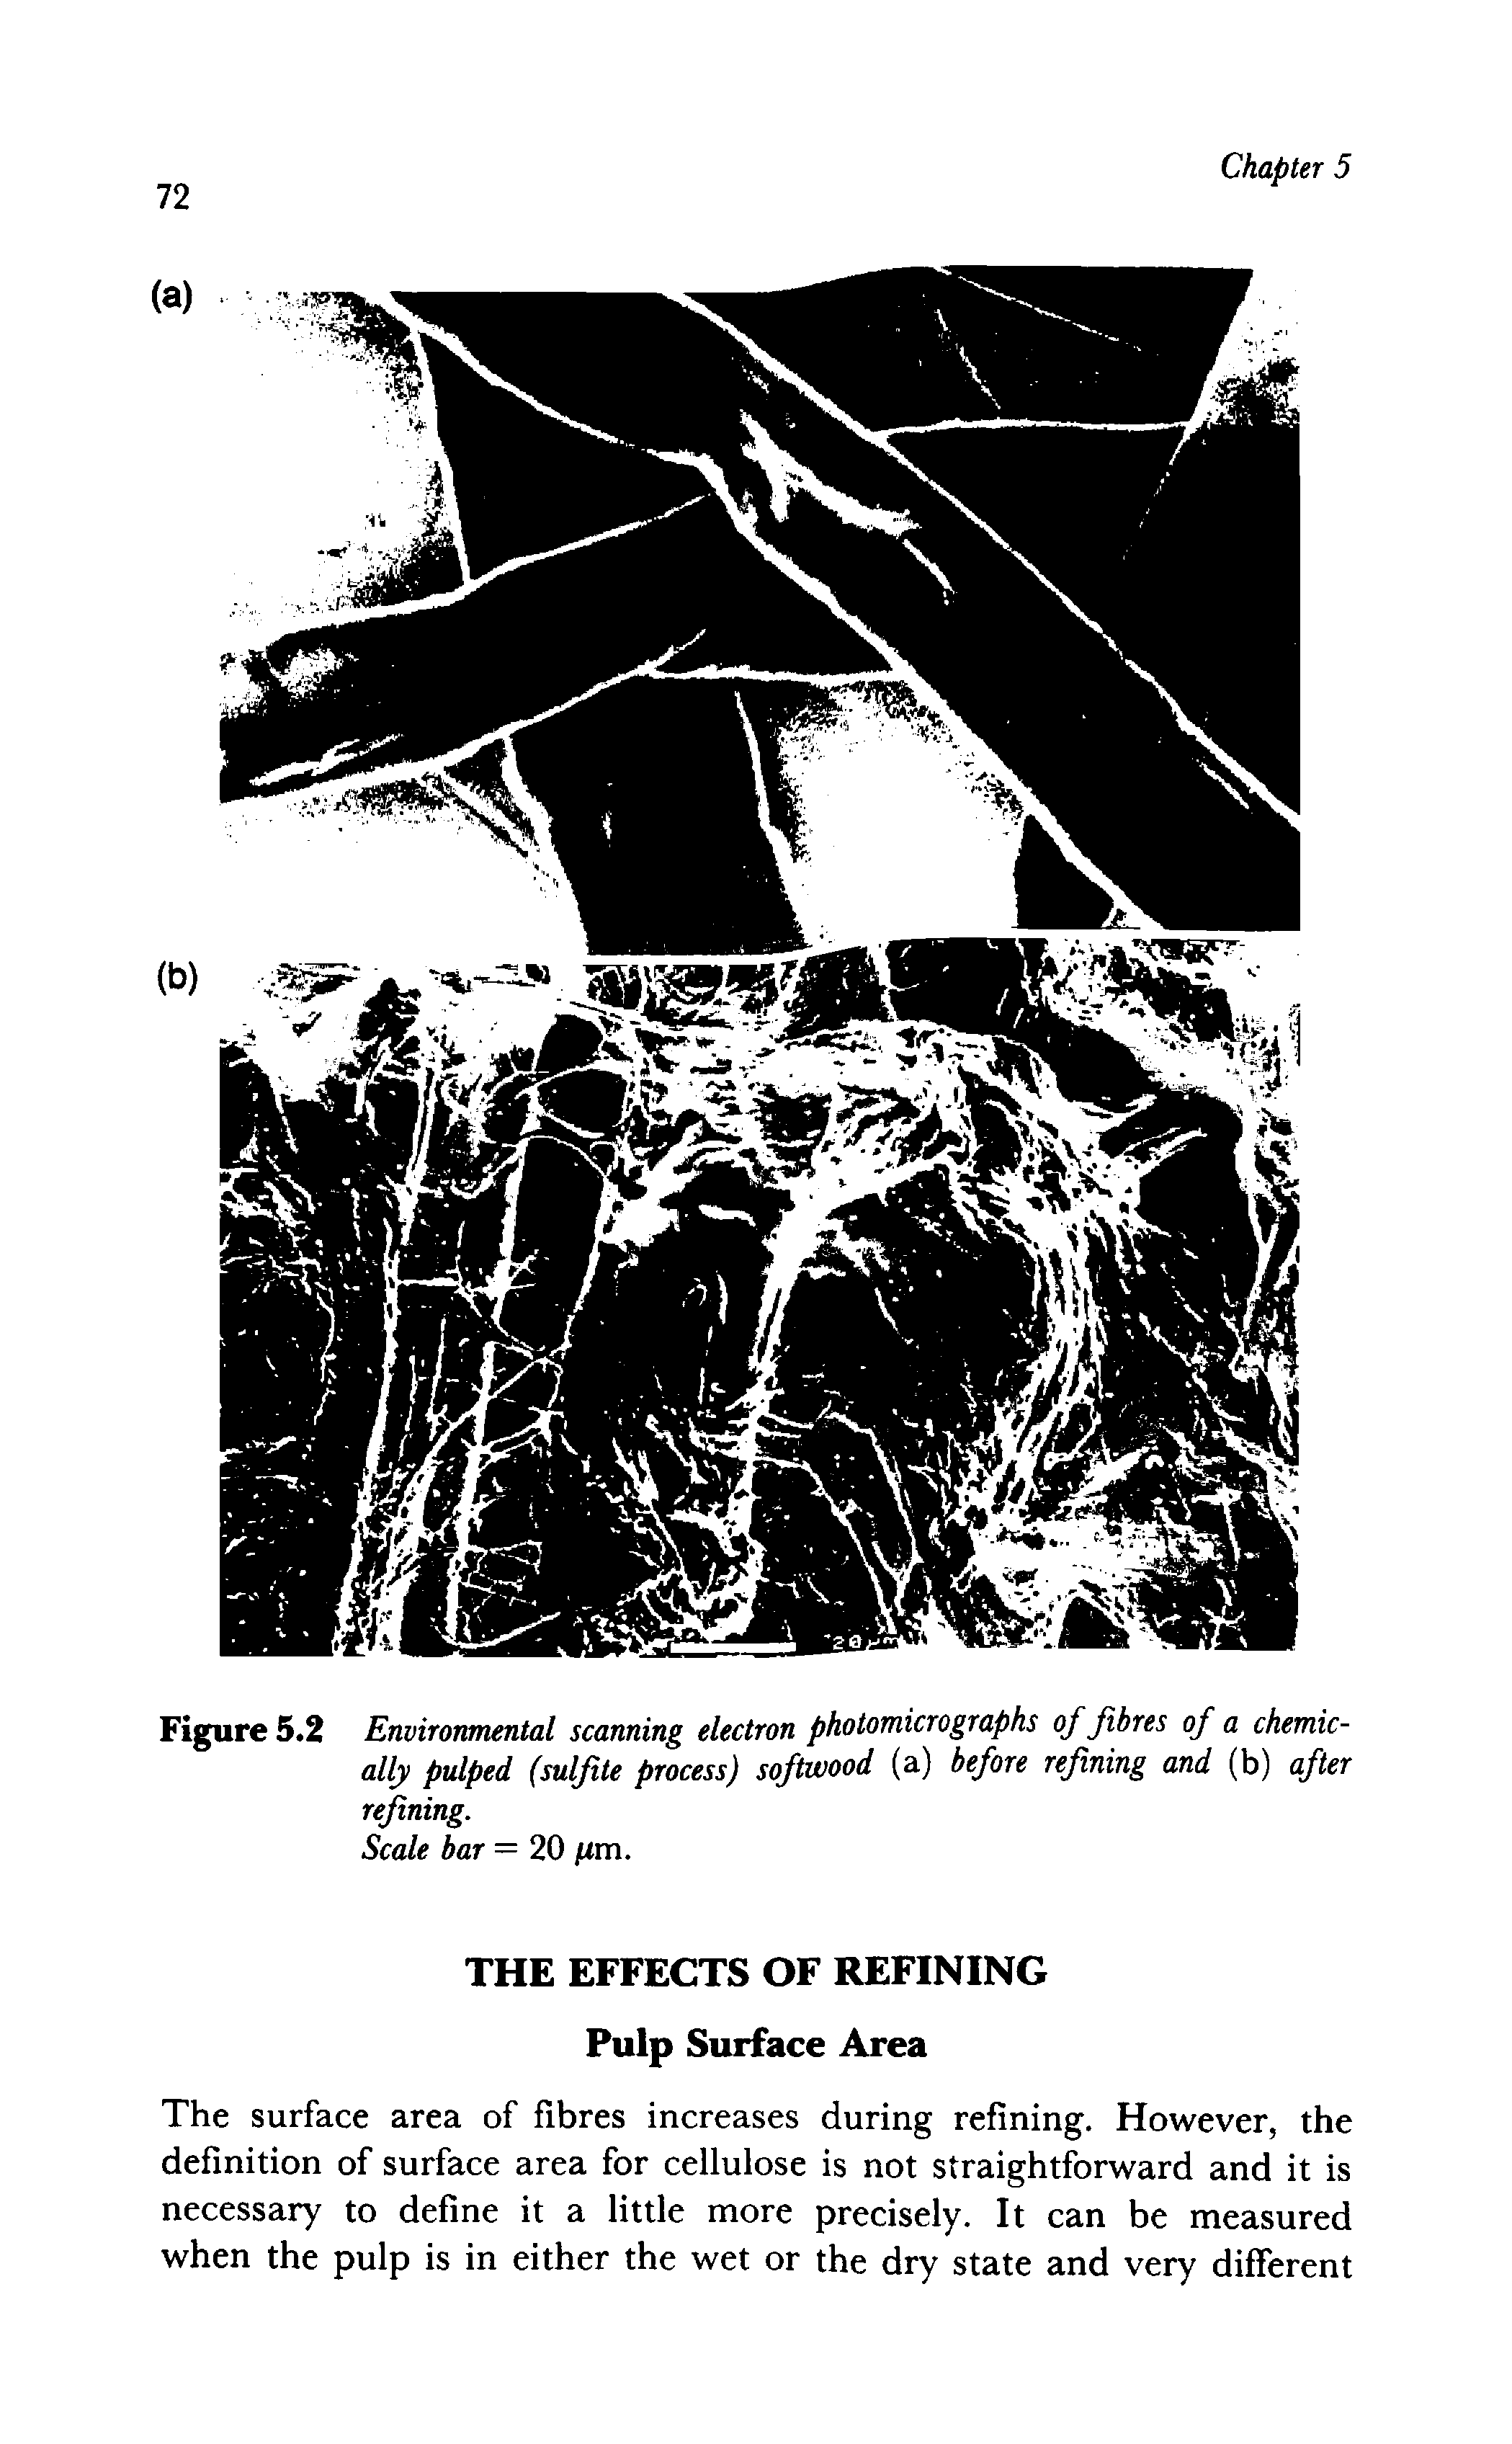 Figure 5.2 Environmental scanning electron photomicrographs of fibres of a chemically pulped (sulfite process) softwood (a) before refining and (b) after refining.